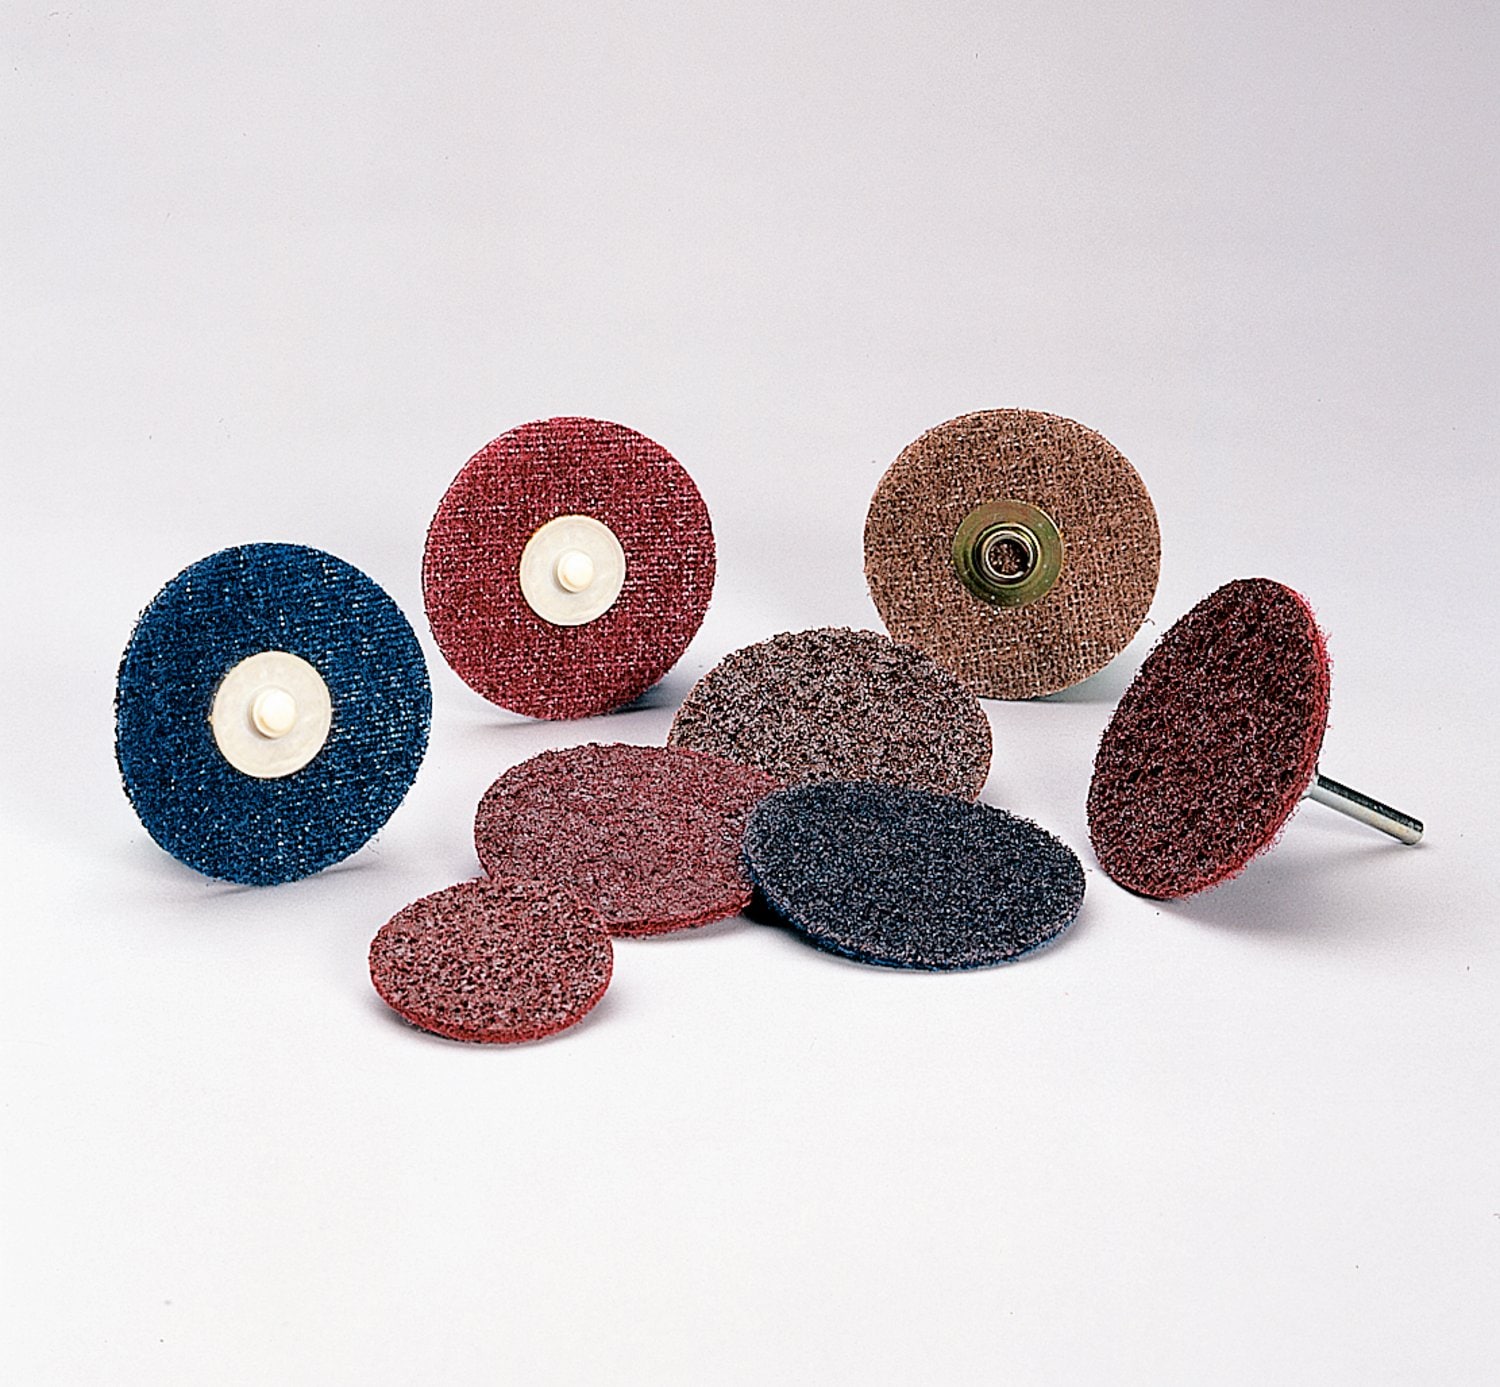 7000047074 - Standard Abrasives Surface Conditioning RC Disc, 845515, 4-1/2 in MED,
10/Pac, 100 ea/Case